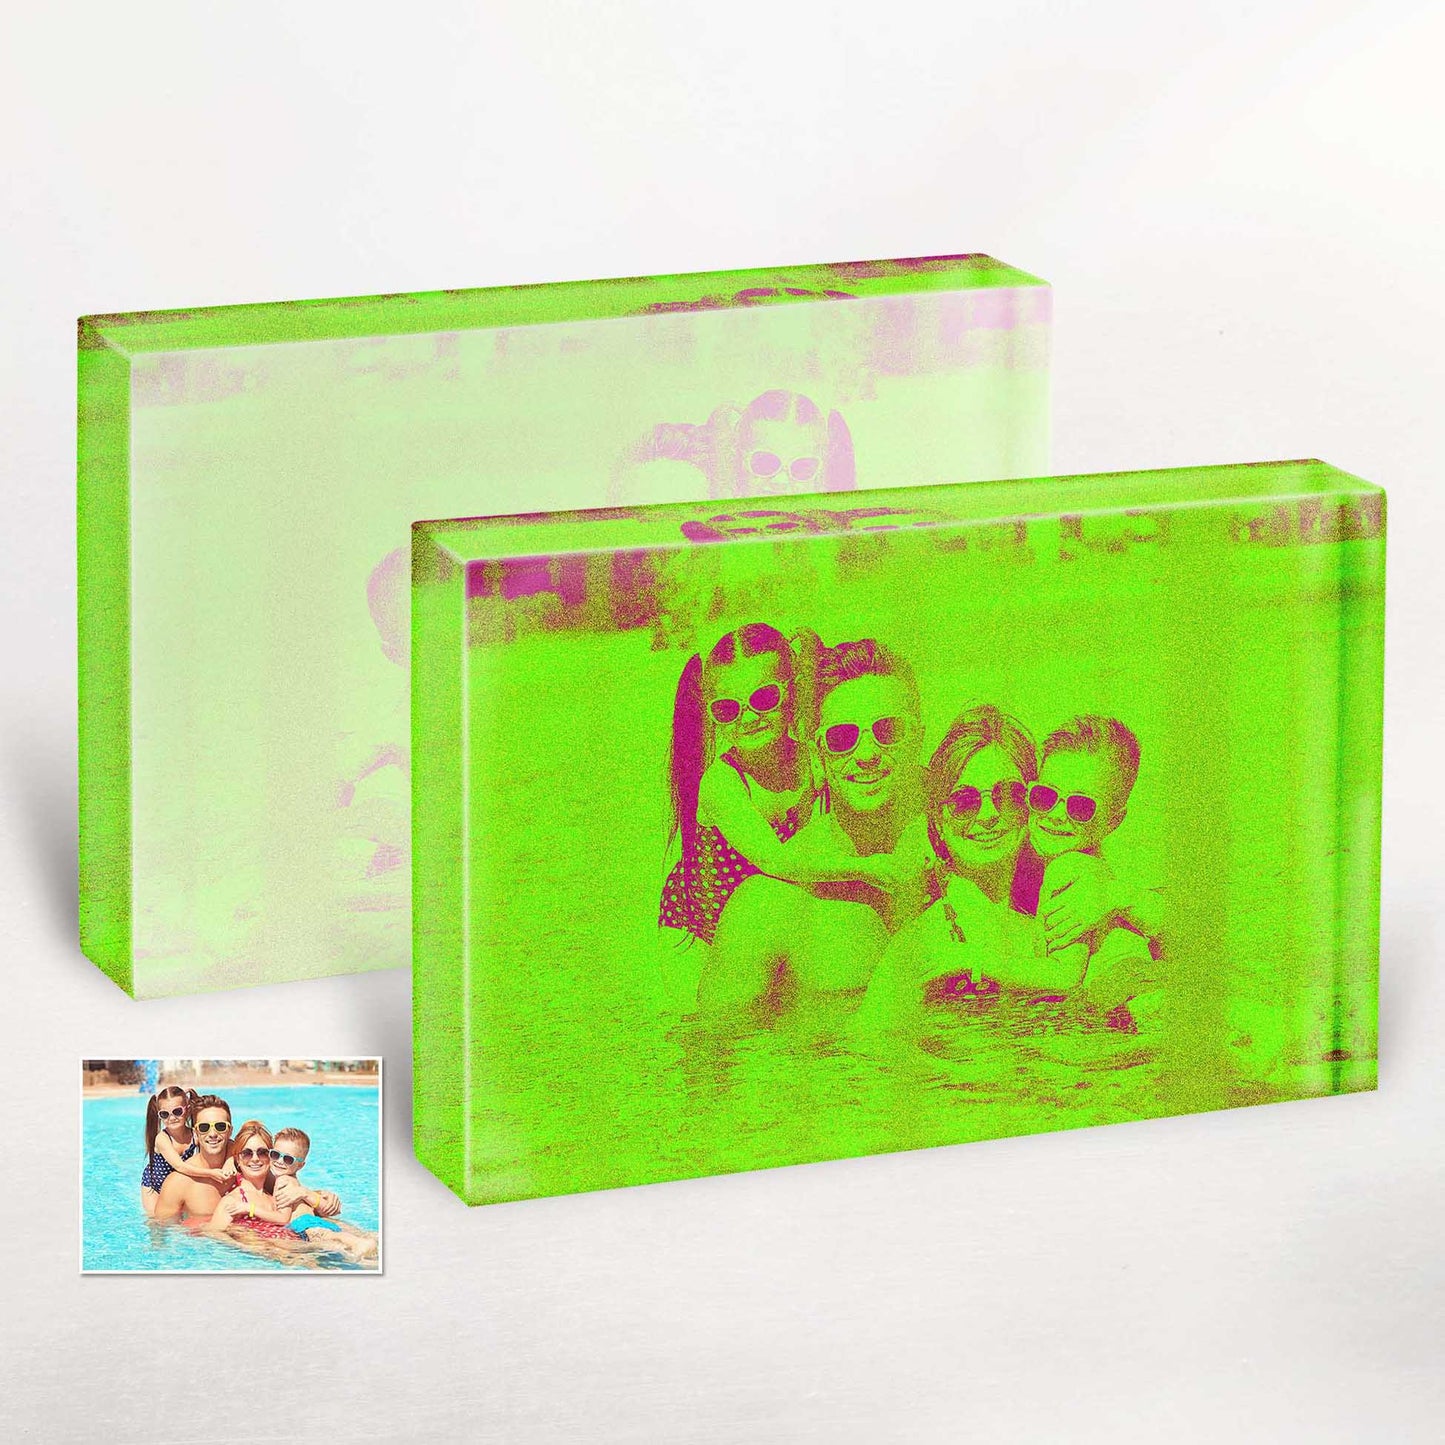 Personalised Neon Green Acrylic Block Photo: Make a hip and trendy statement with our cool and fresh neon green acrylic block photos. Customised from your own photo, it's the perfect gift that stands out from the crowd.